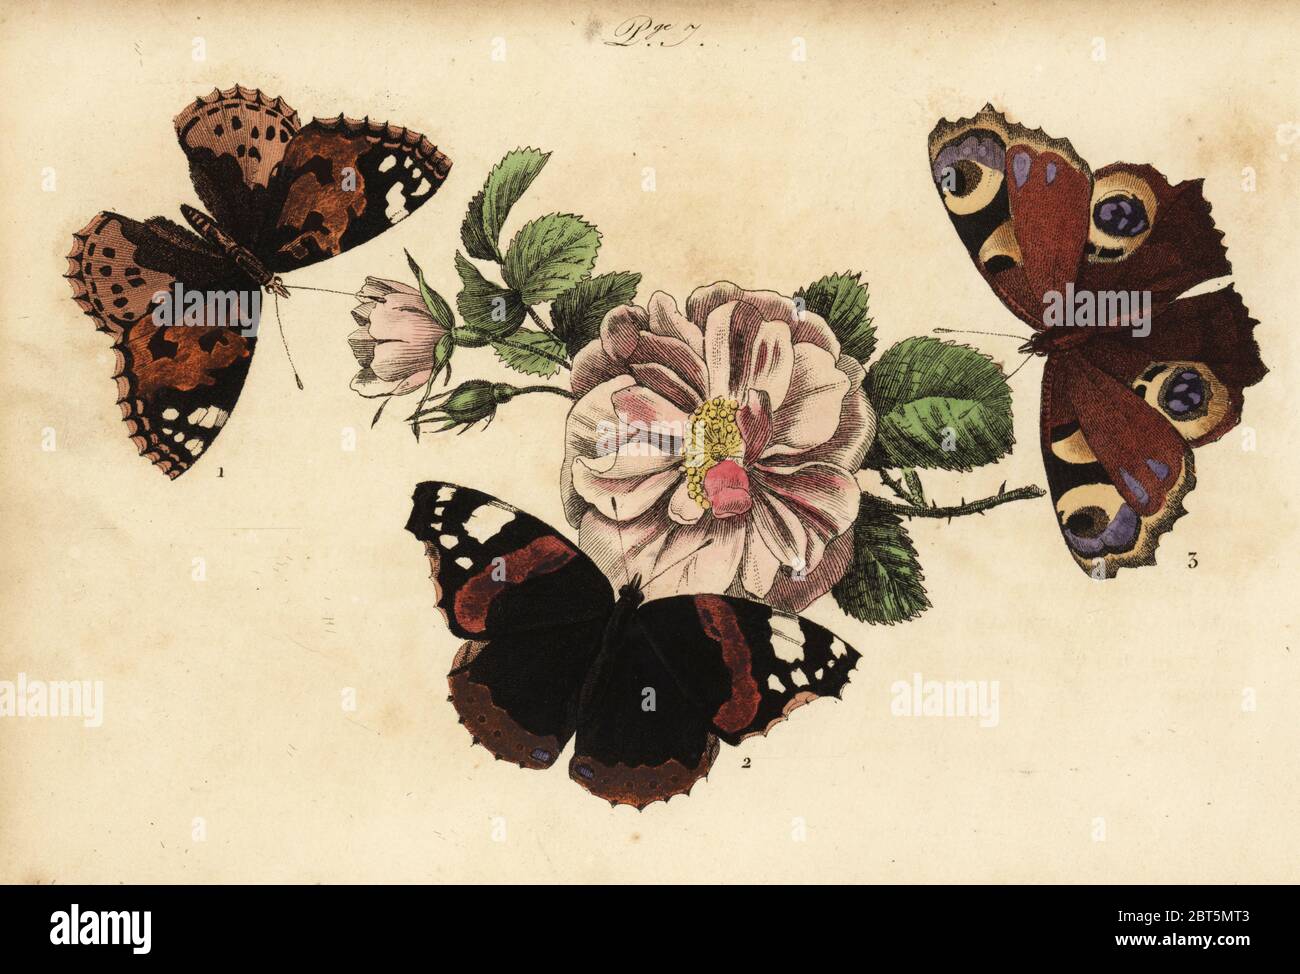 Painted lady butterfly, Vanessa cardui 1, red admiral, Vanessa atalanta 2 and European peacock, Aglais io 3. Vanesse belle-dame, Vanesse vulcain, Vanesse paon de jour. Handcoloured lithograph from Musee du Naturaliste dedie a la Jeunesse, Histoire des Papillons, Hippolyte and Polydor Pauquet, Paris, 1833. Stock Photo